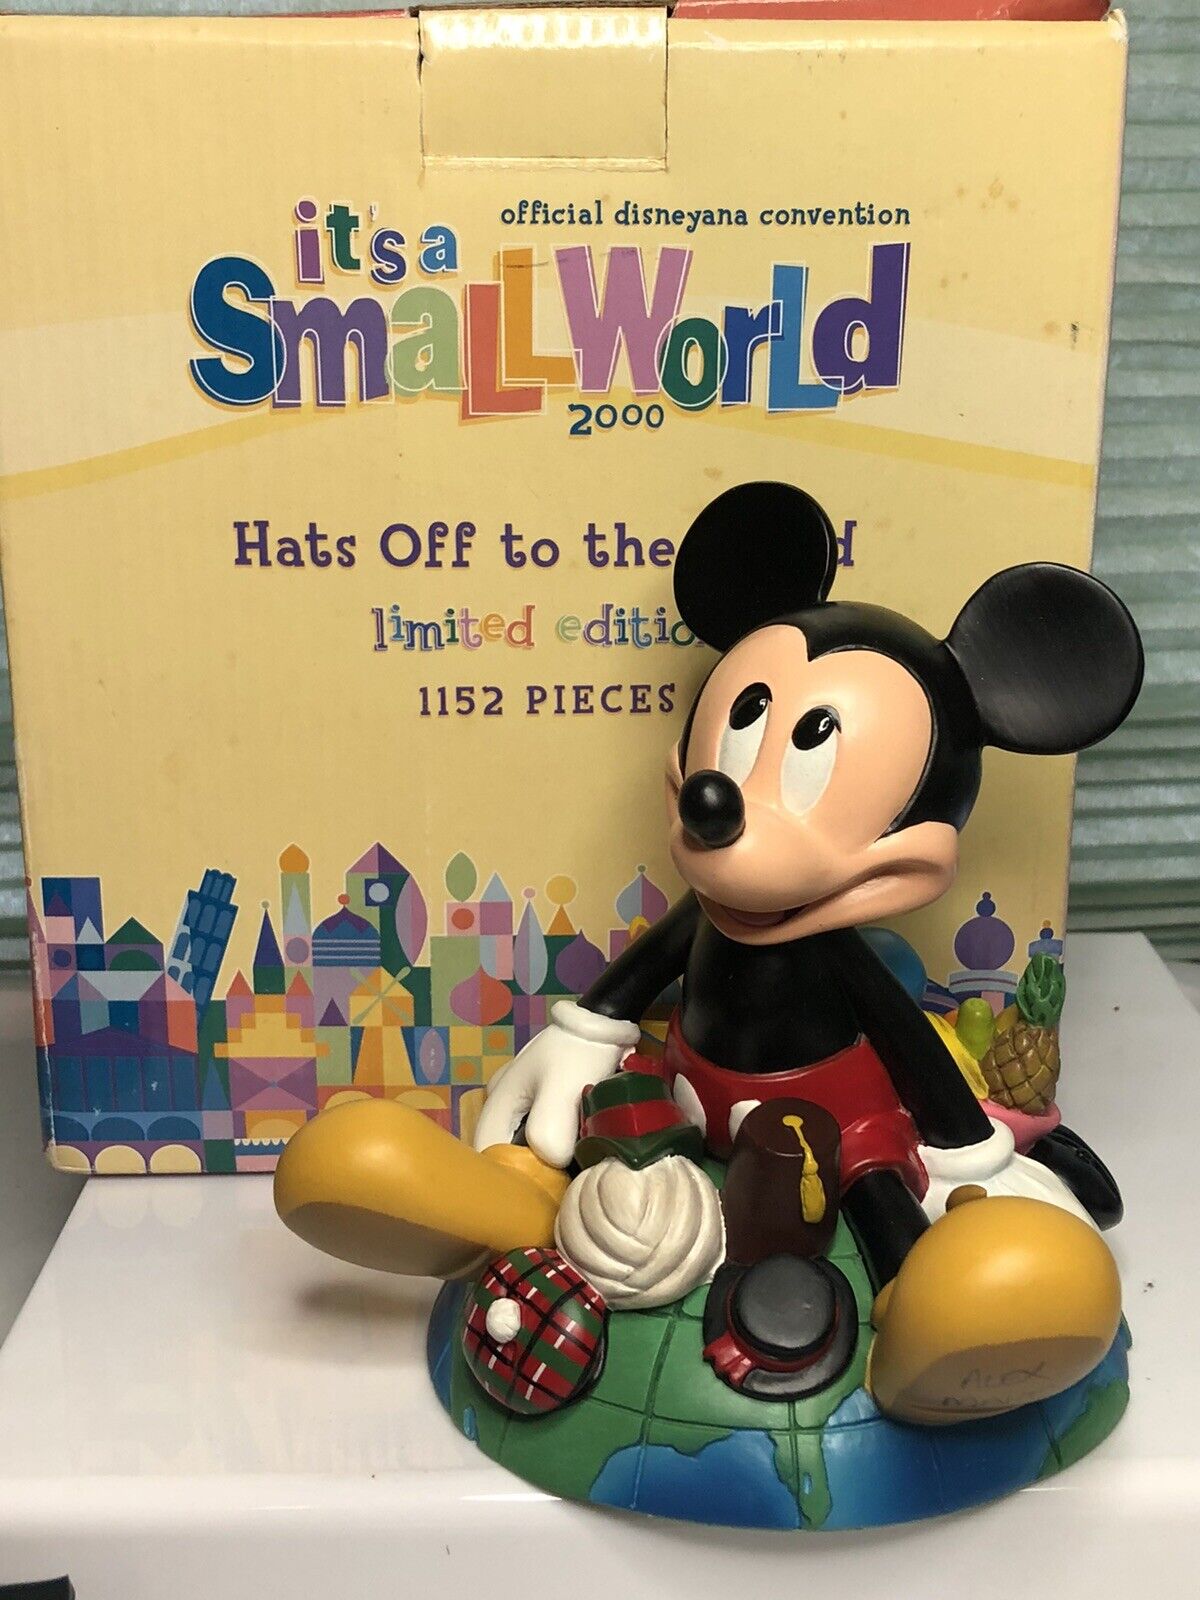 New Disneyana Convention 2000 Mickey Mouse Hats Off Its A Small World LE 1152